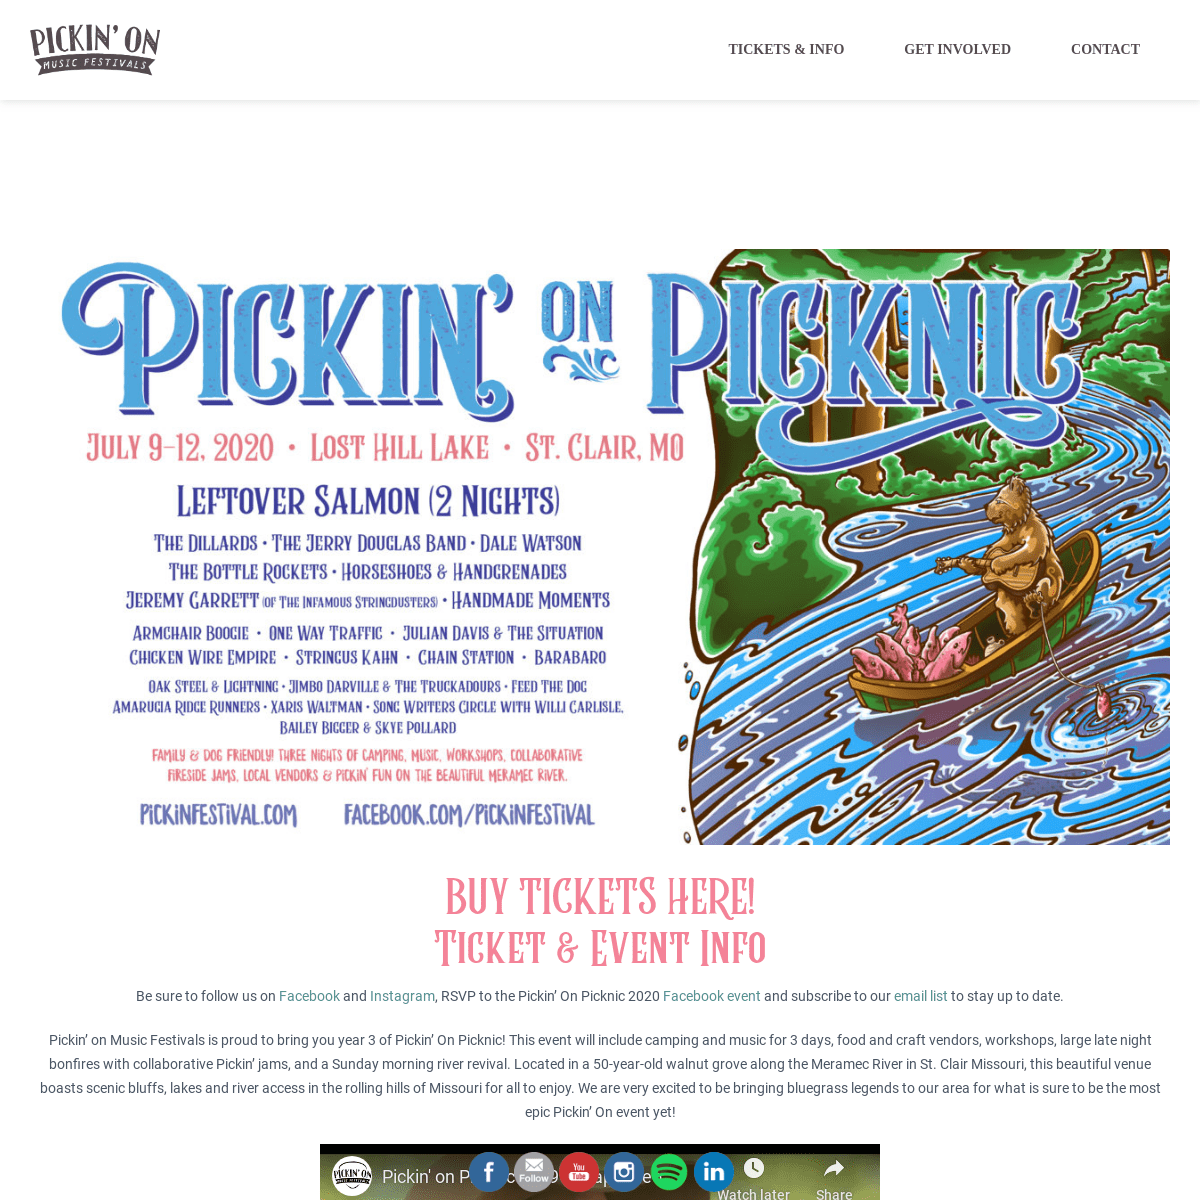 A complete backup of pickinfestival.com